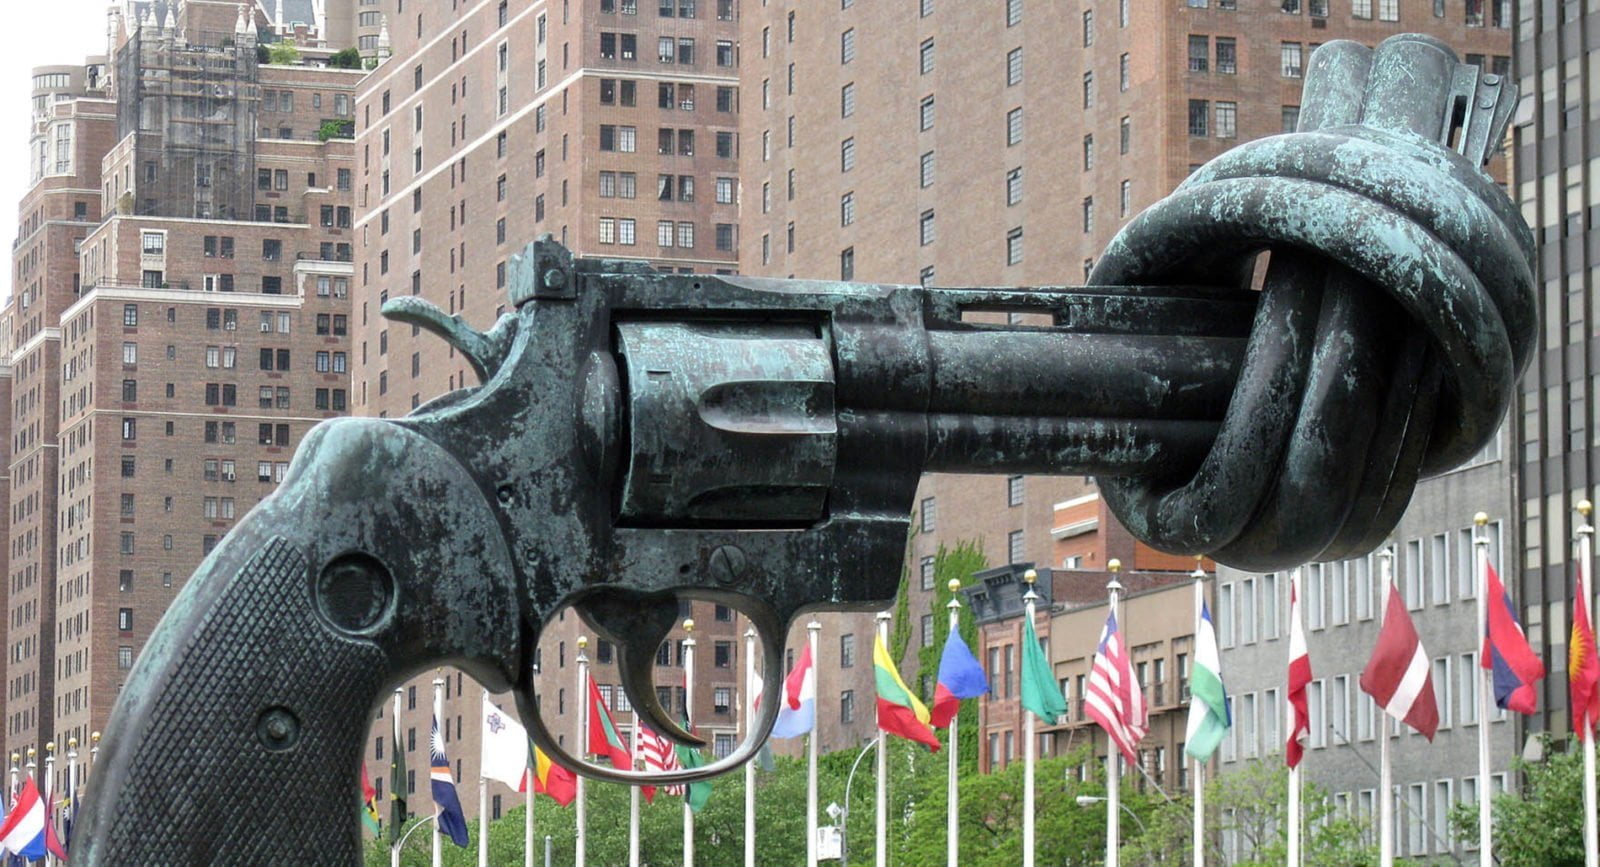 A sculpture of a 45-caliber revolver with its barrel knotted outside the UN in New York, USA.